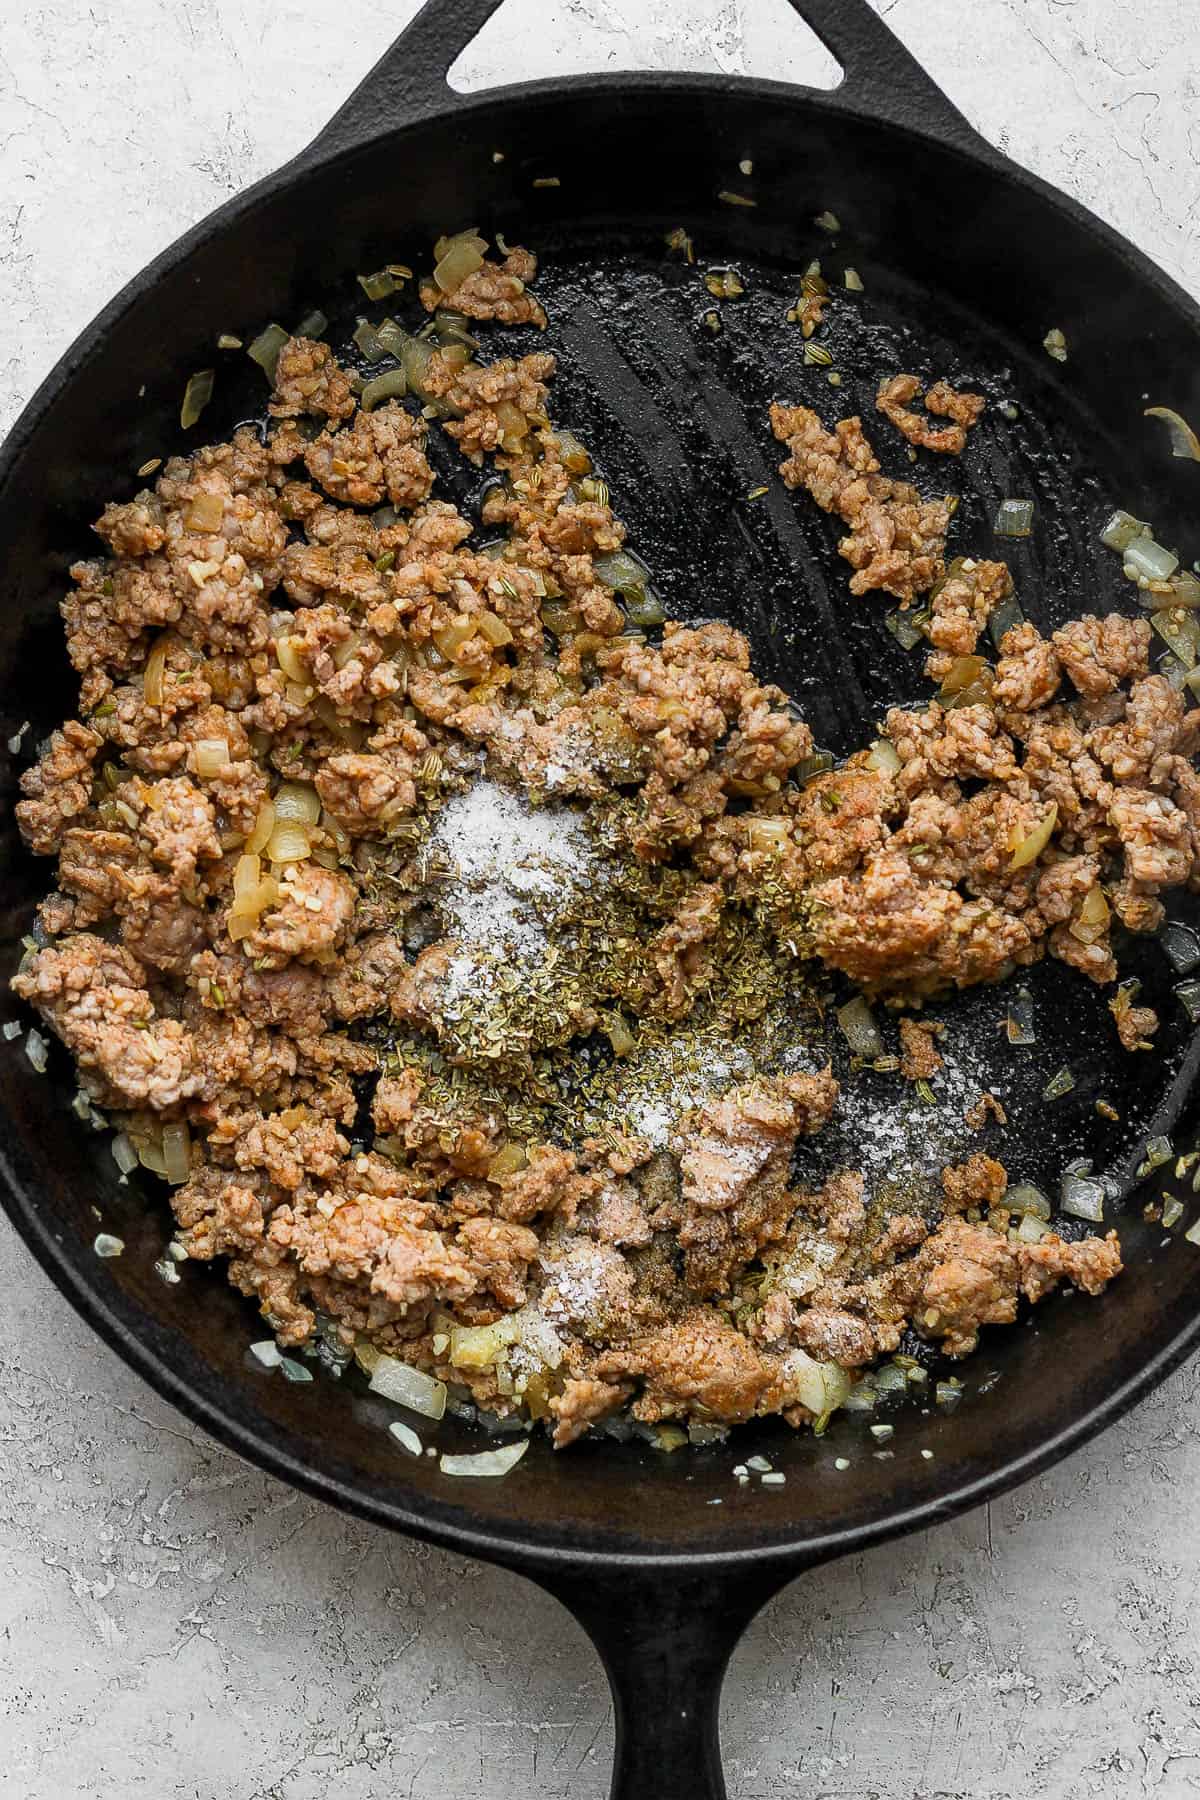 A skillet with browned Italian sausage and seasonings added.